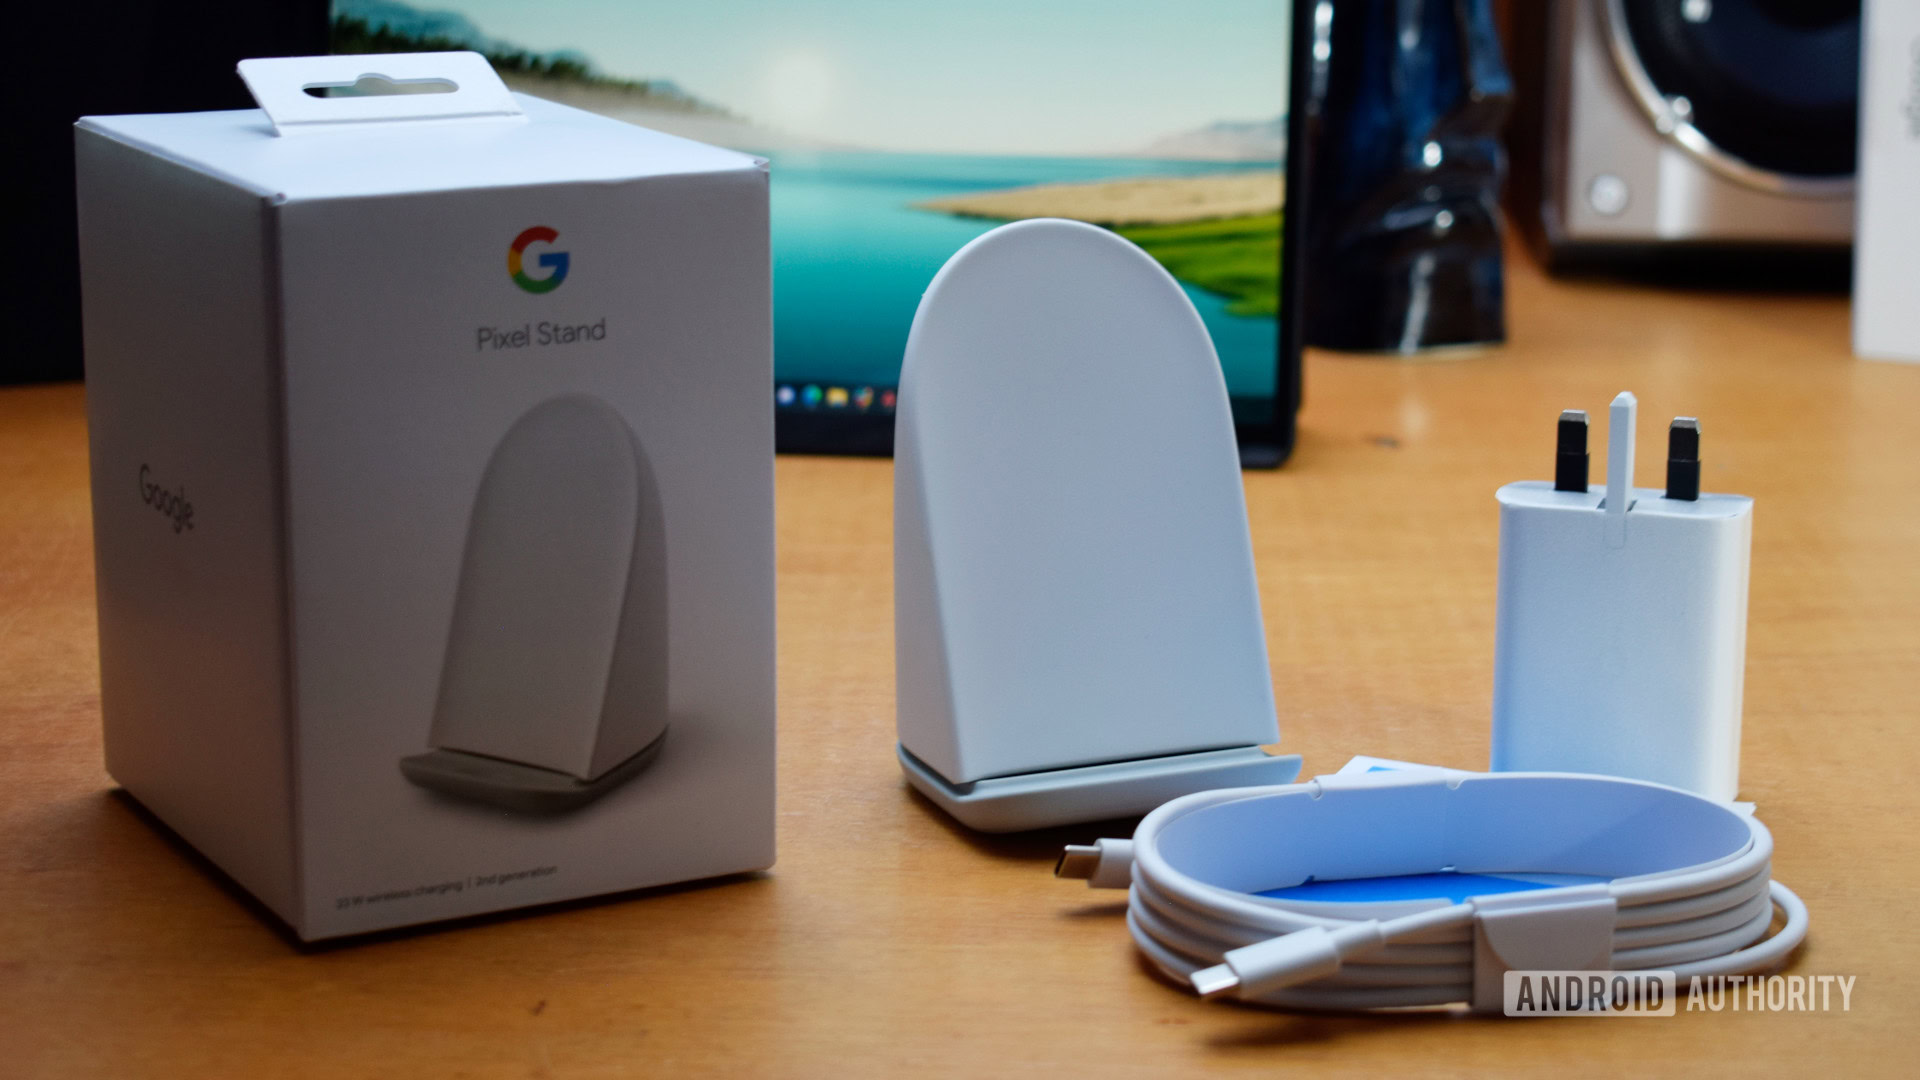 Google Pixel Stand Box Contents - The best pixel 7 chargers